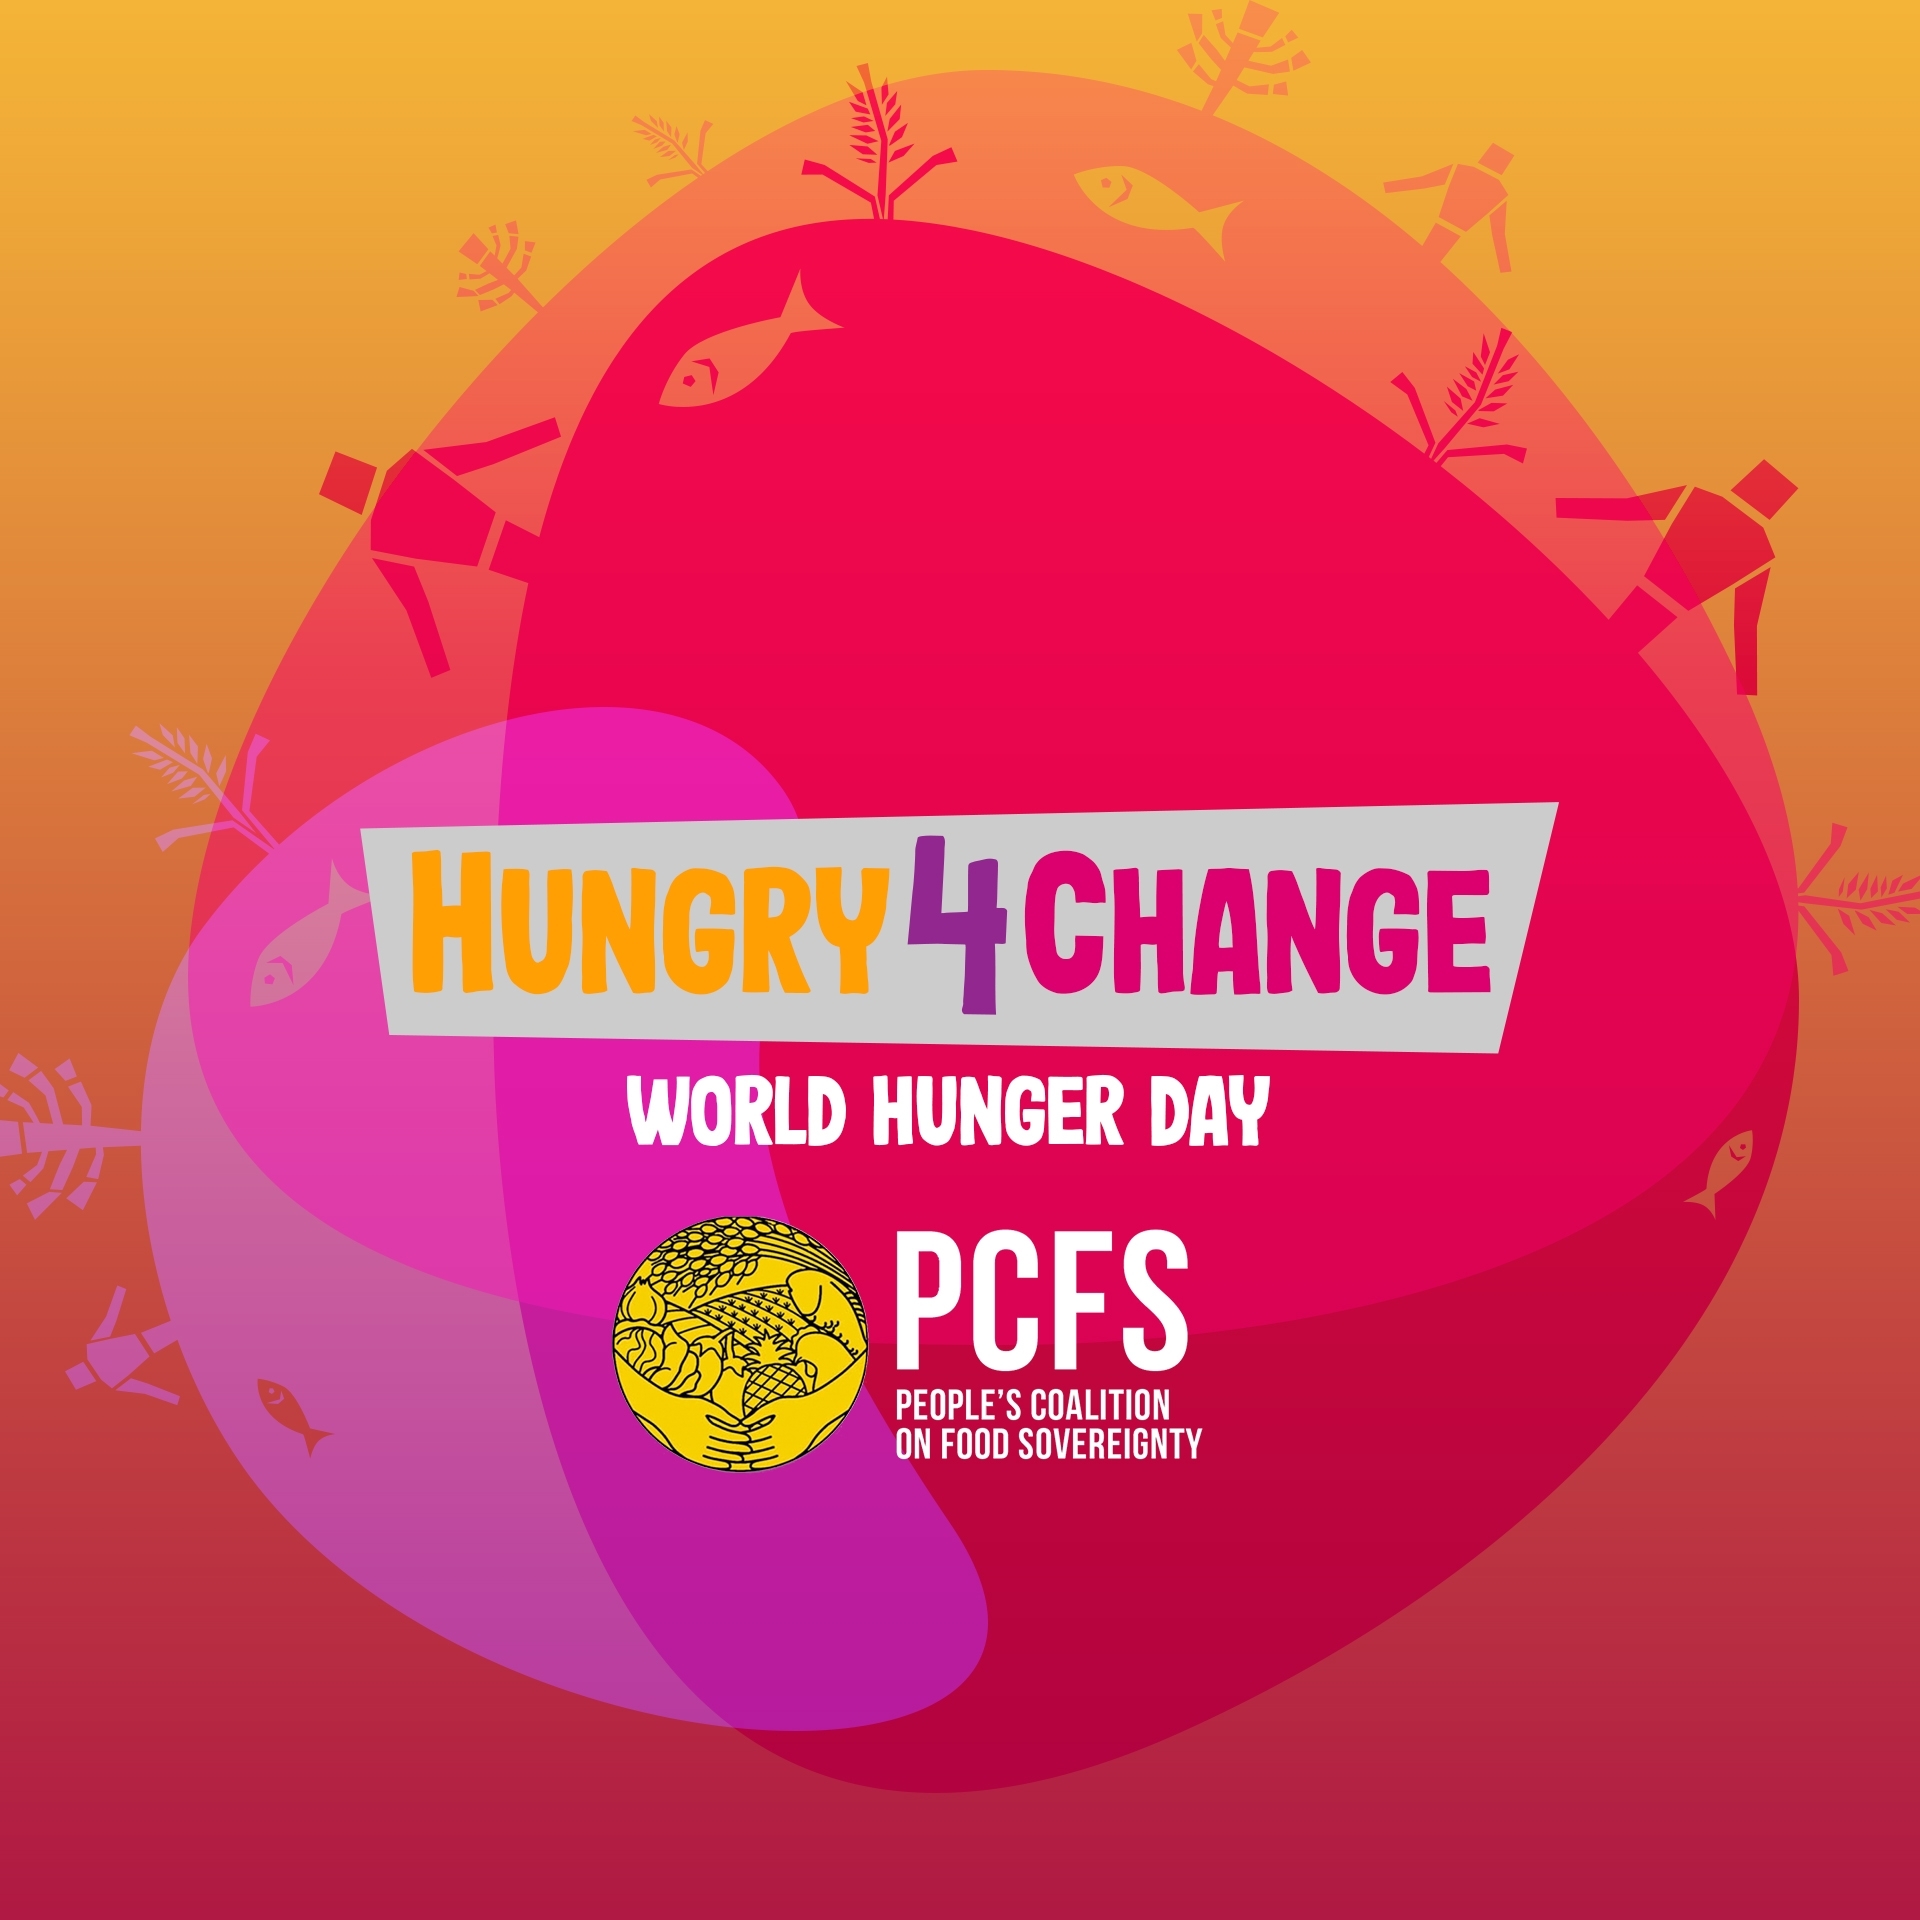 Recap We are Hungry4Change! World Hunger Day 2020 Global Action